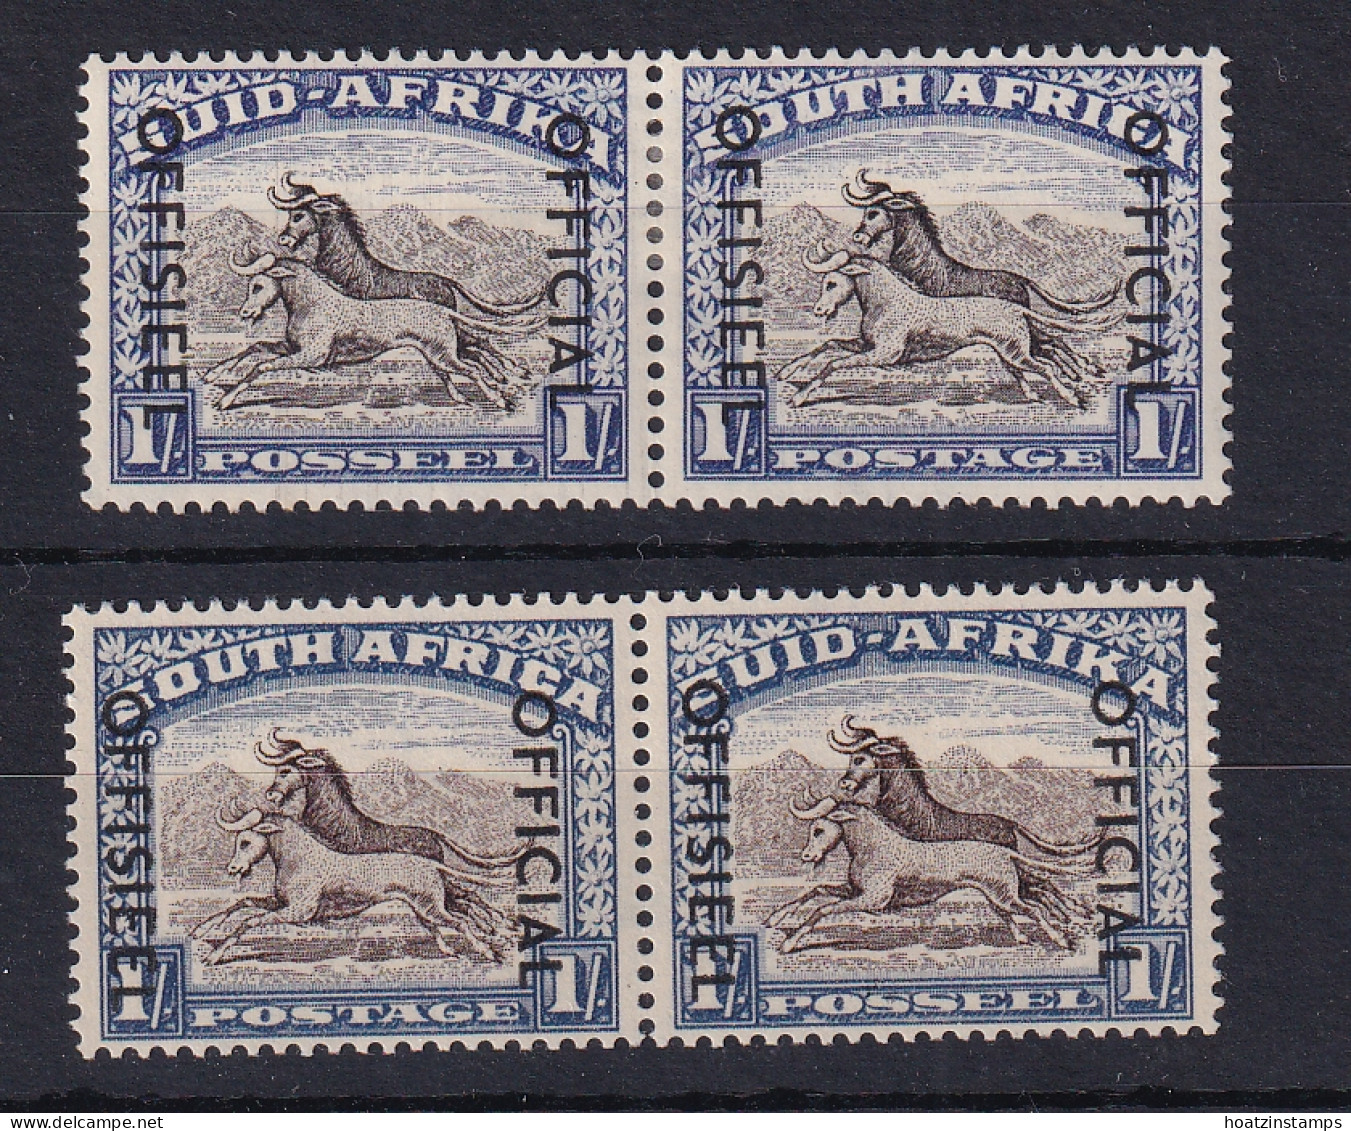 South Africa: 1950/54   Official - Wildebeest   SG O47 / O47a   1/-    MH Pair - Oficiales